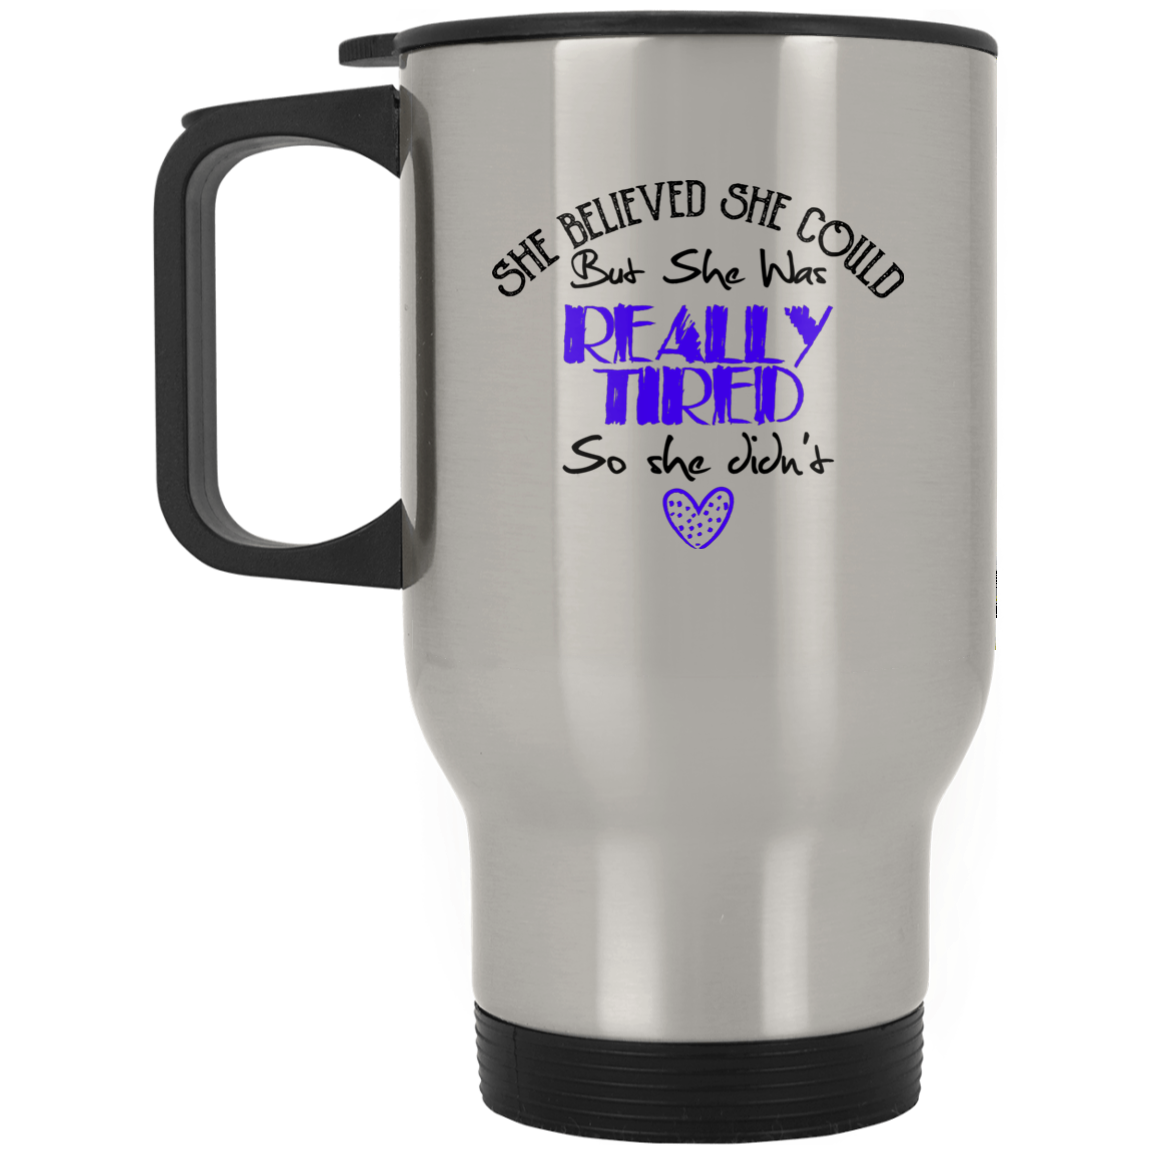 She Believed She Could But She Was Really Tiered Stainless Travel Mug - GoneBold.gift